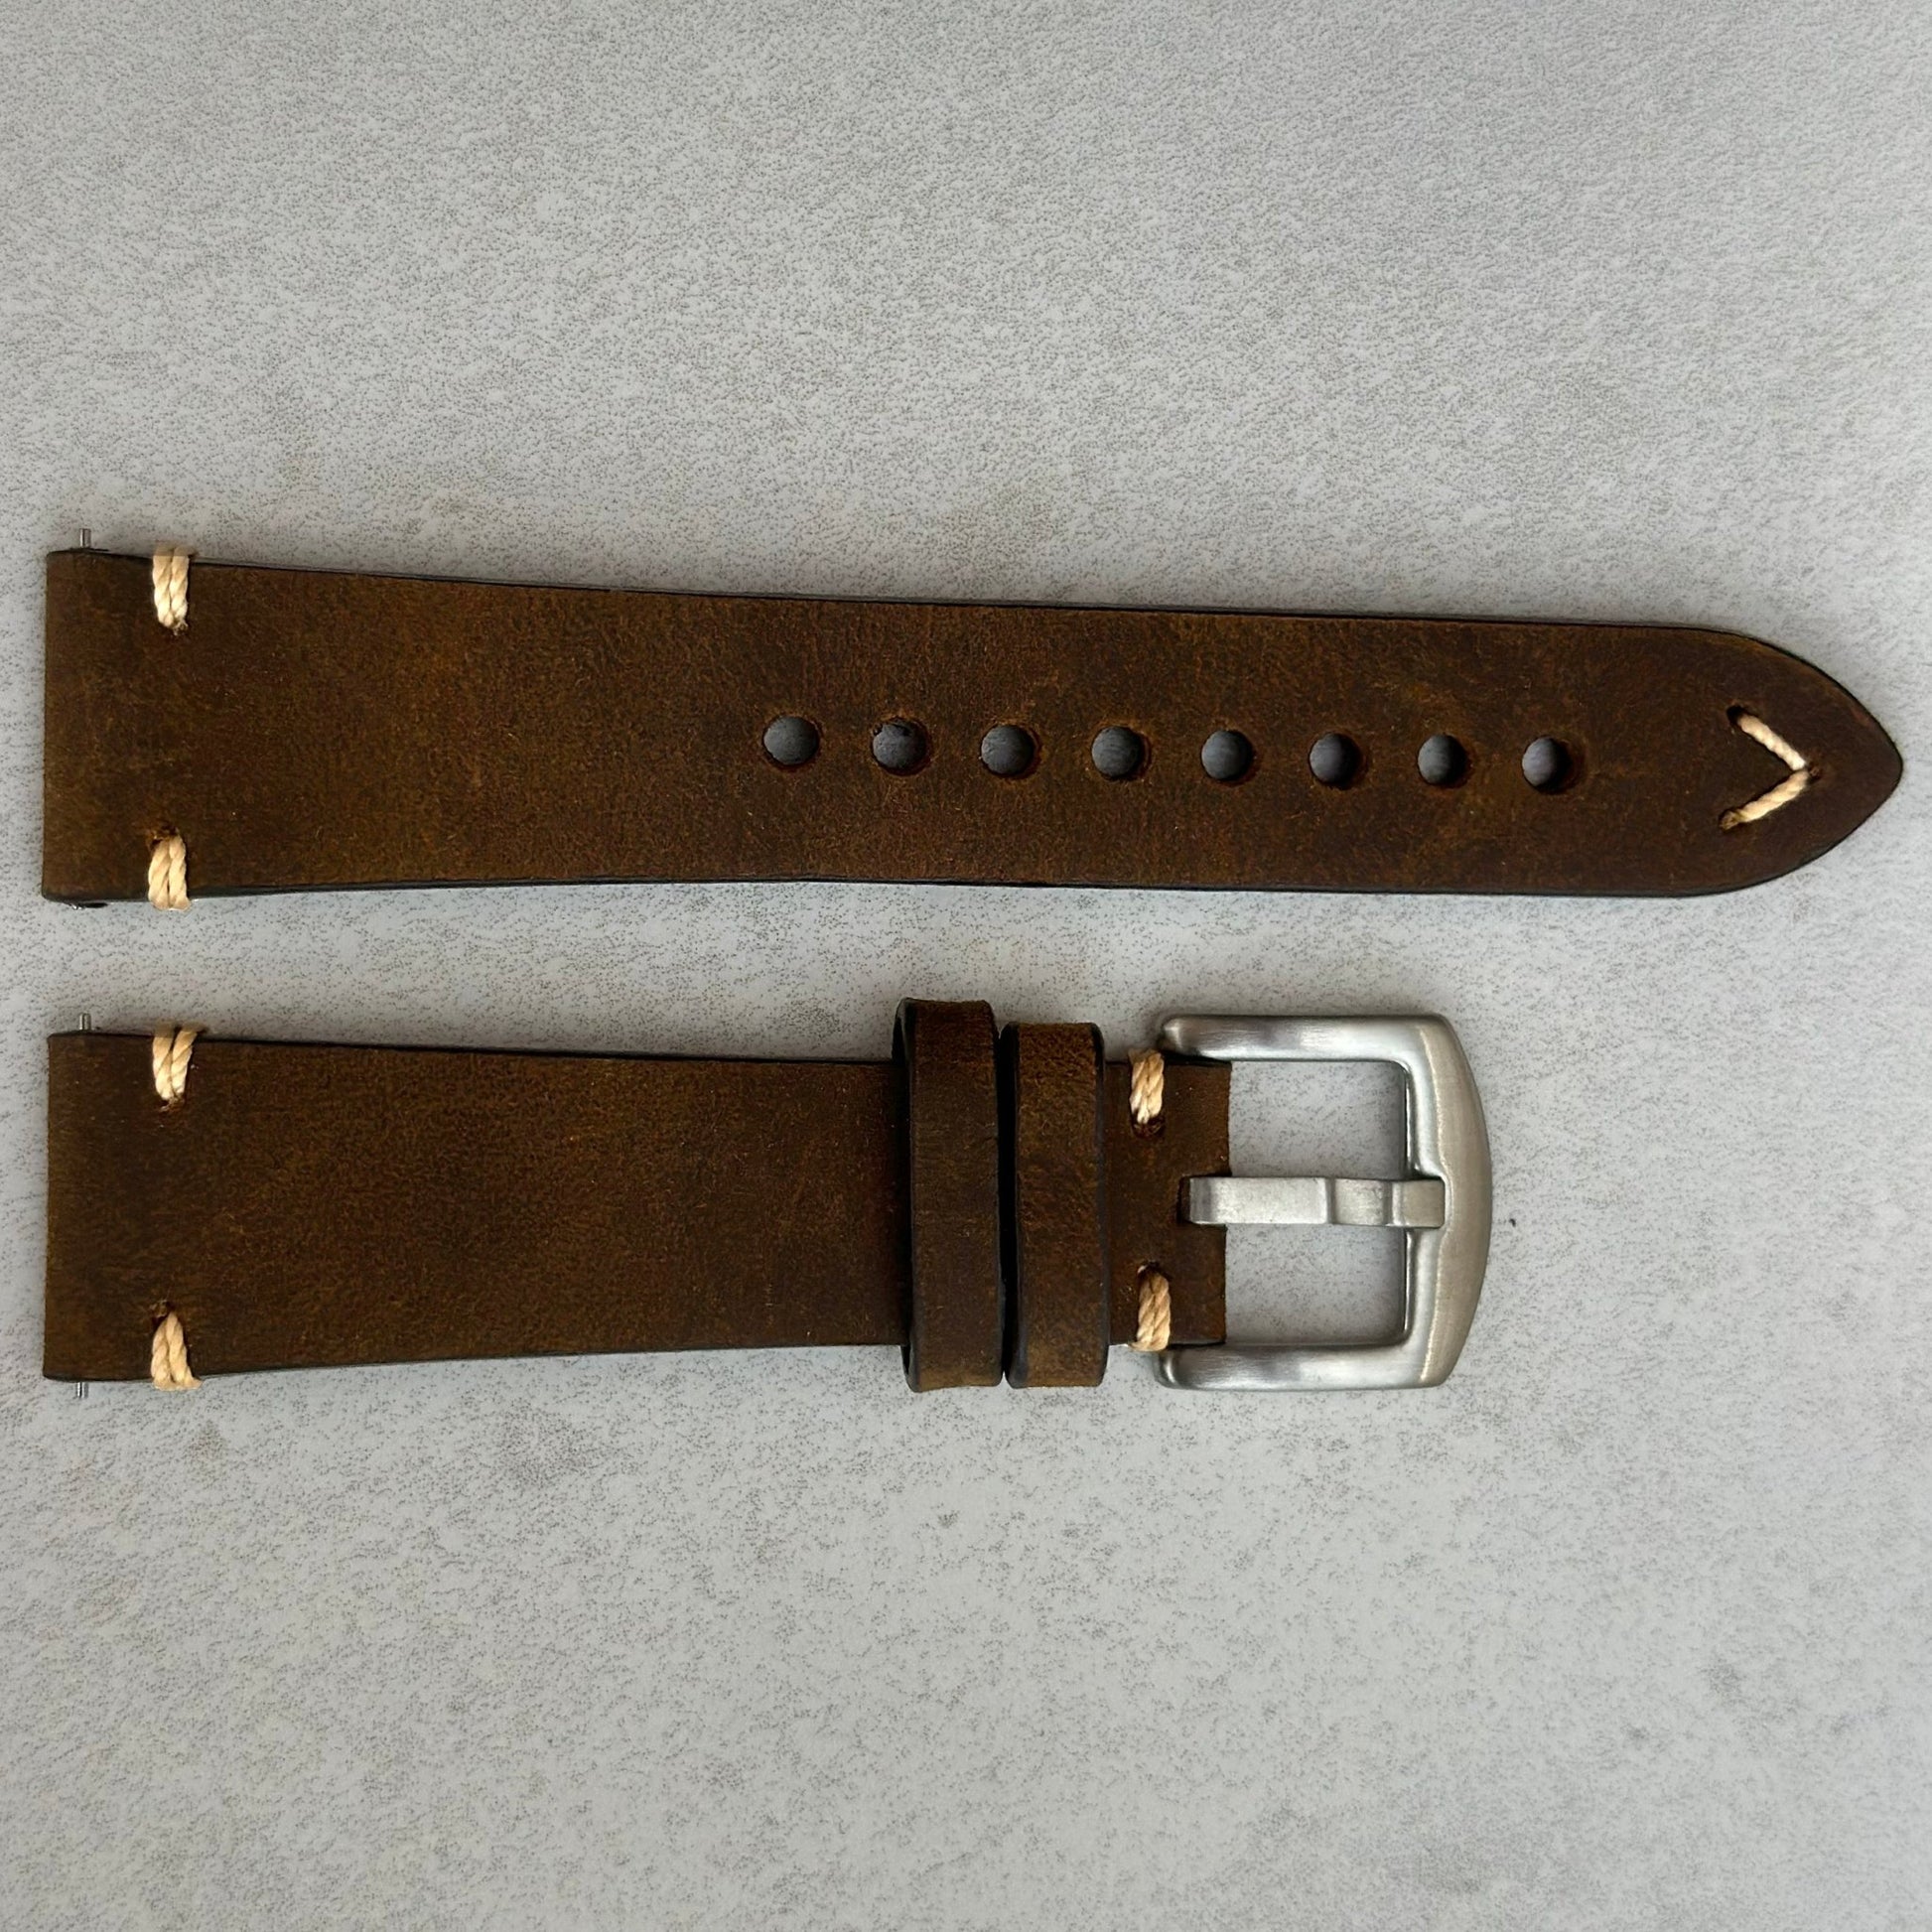 Madrid chocolate brown horse leather watch strap. Contrast ivory stitching. 316L stainless steel buckle. Watch And Strap